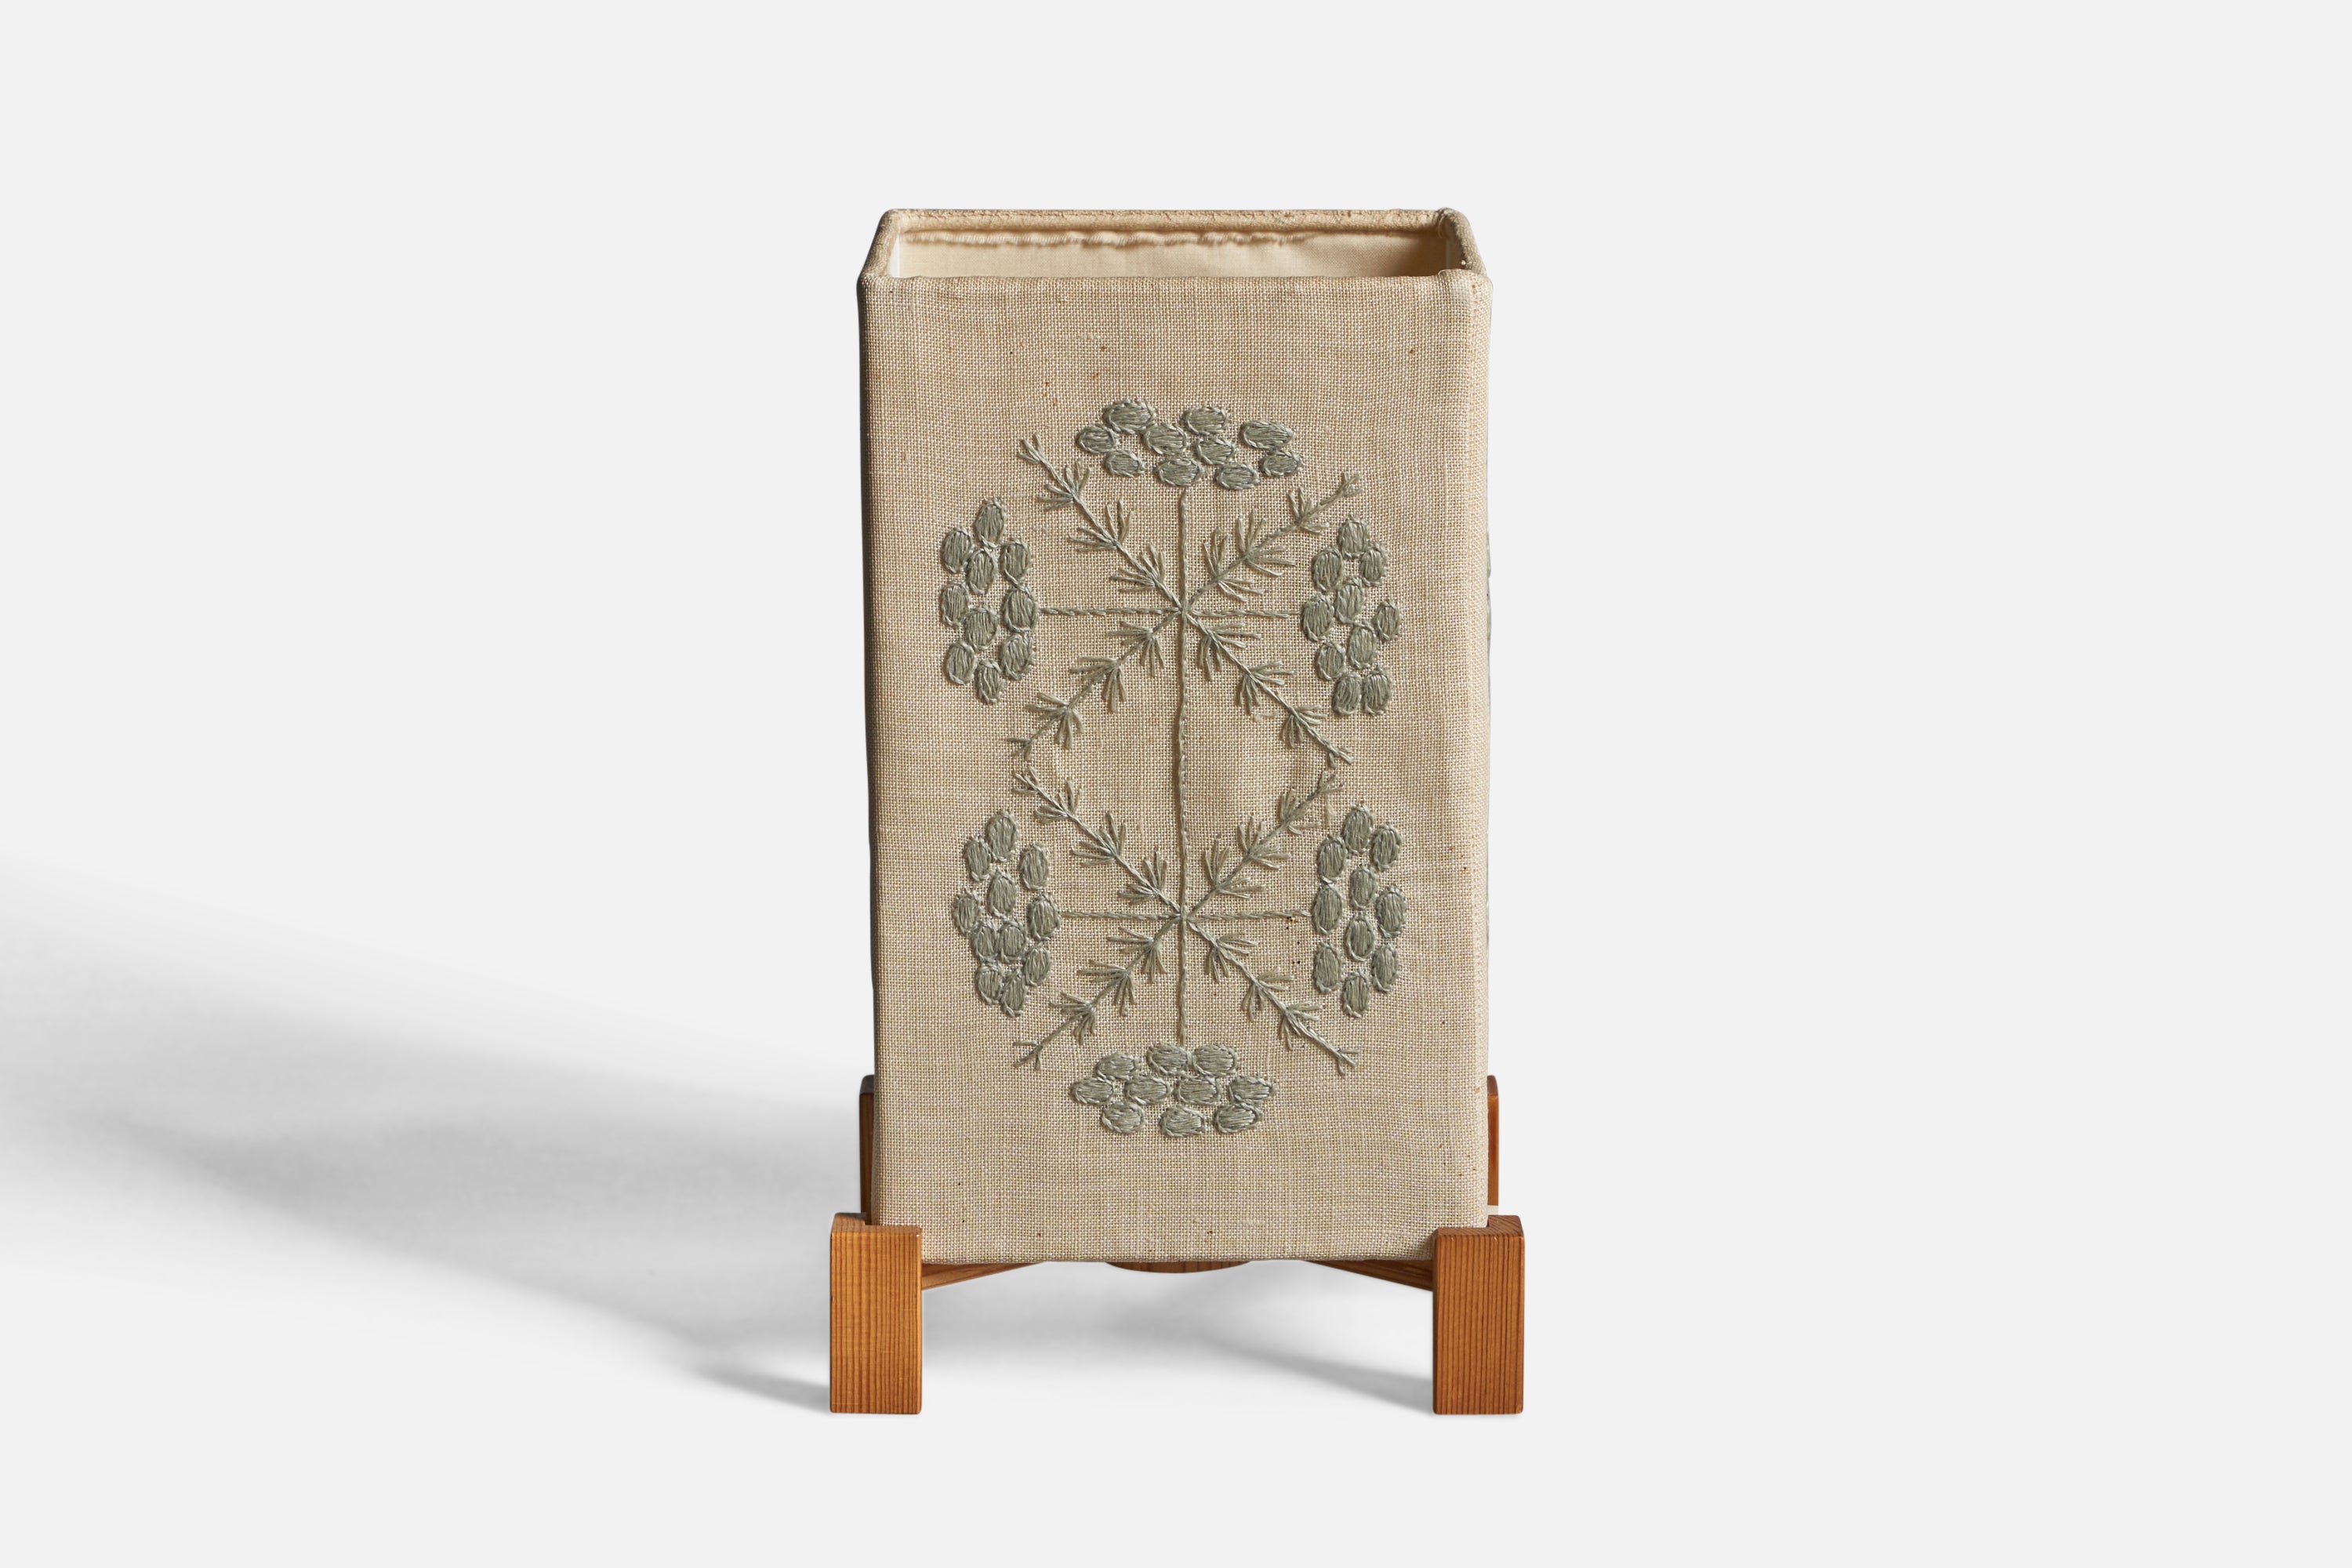 A pine and embroidery fabric table lamp, designed and produced in Sweden, c. 1960s.

Overall Dimensions (inches): 10.15